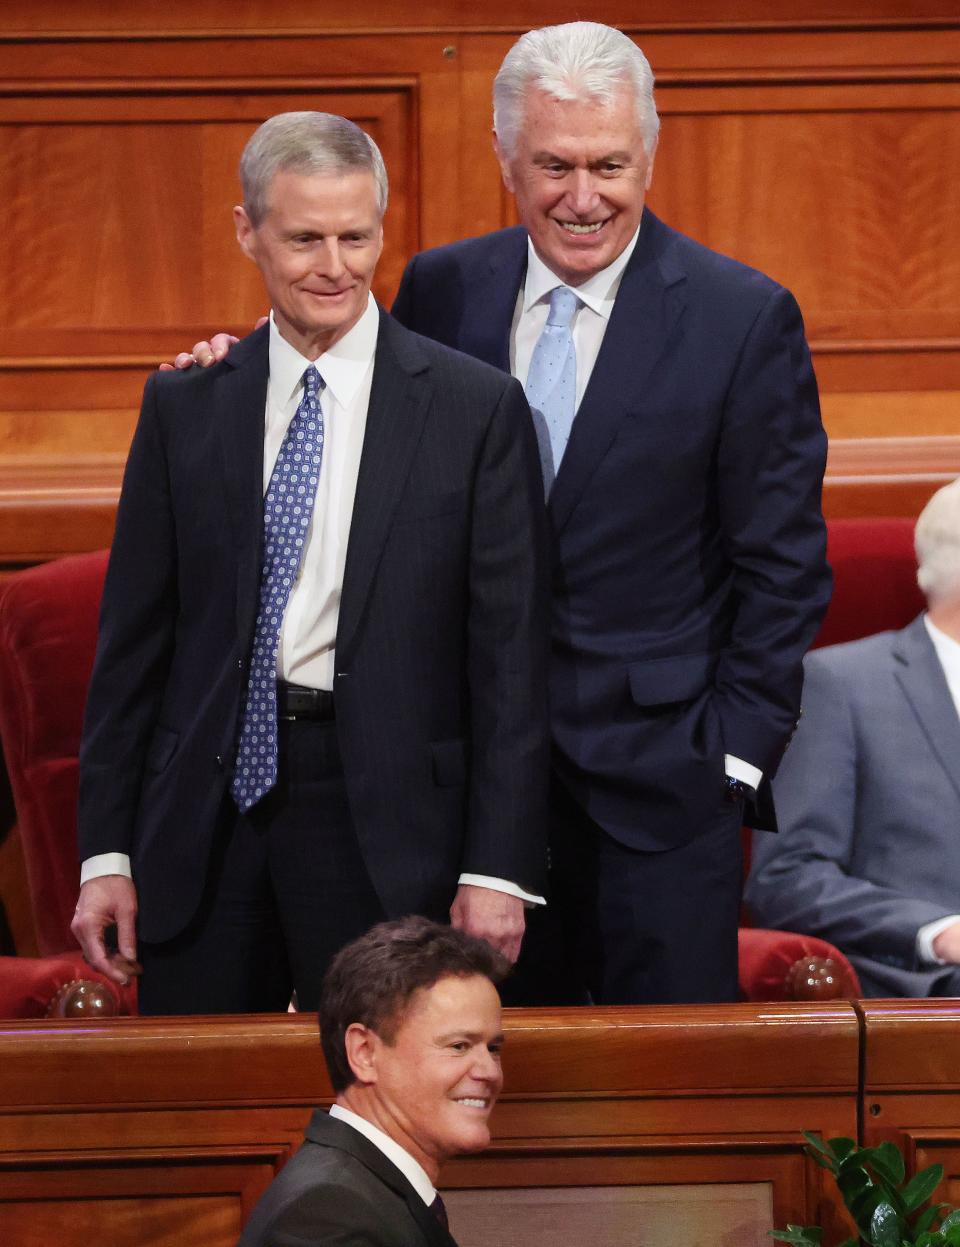 Elder David A. Bednar and Elder Dieter F. Uchtdorf pose for a photo with Donny Osmond prior to the 193rd Semiannual General Conference of The Church of Jesus Christ of Latter-day Saints at the Conference Center in Salt Lake City on Saturday, Sept. 30, 2023. | Jeffrey D. Allred, Deseret News